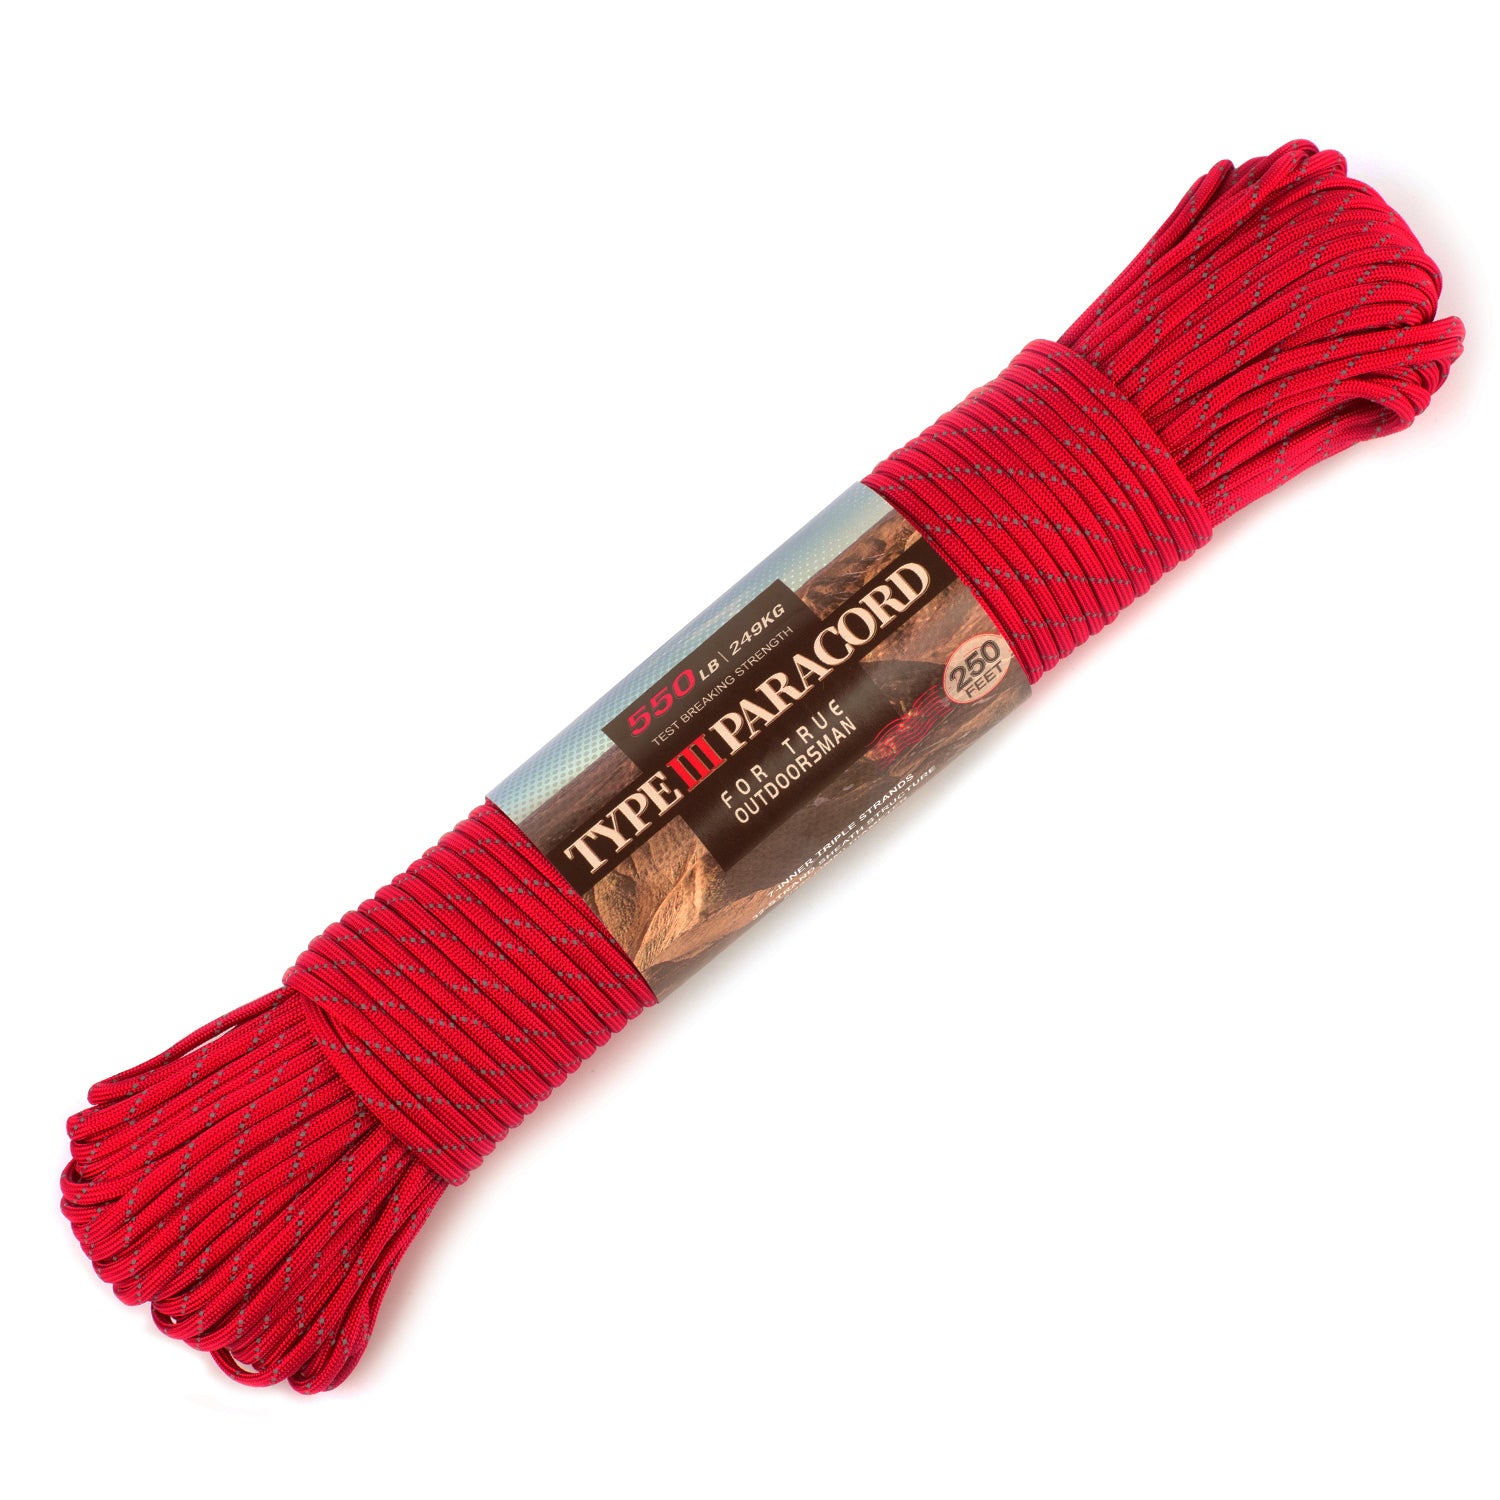 HERCULES Reflective 550 Paracord Imperial Red for Camping Rope